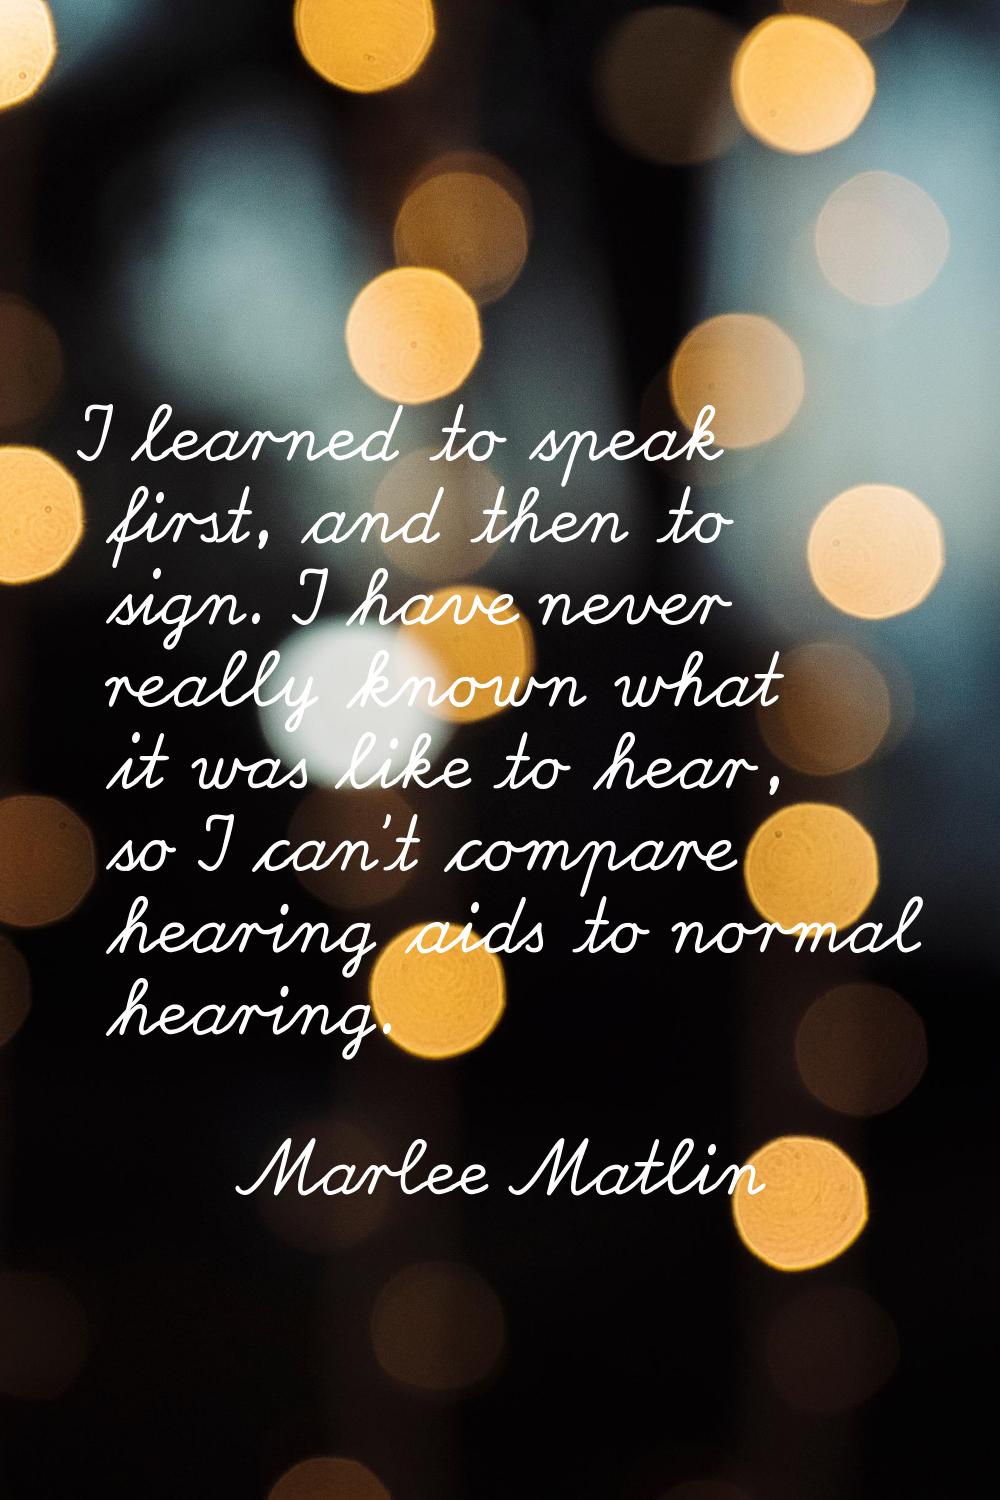 I learned to speak first, and then to sign. I have never really known what it was like to hear, so 